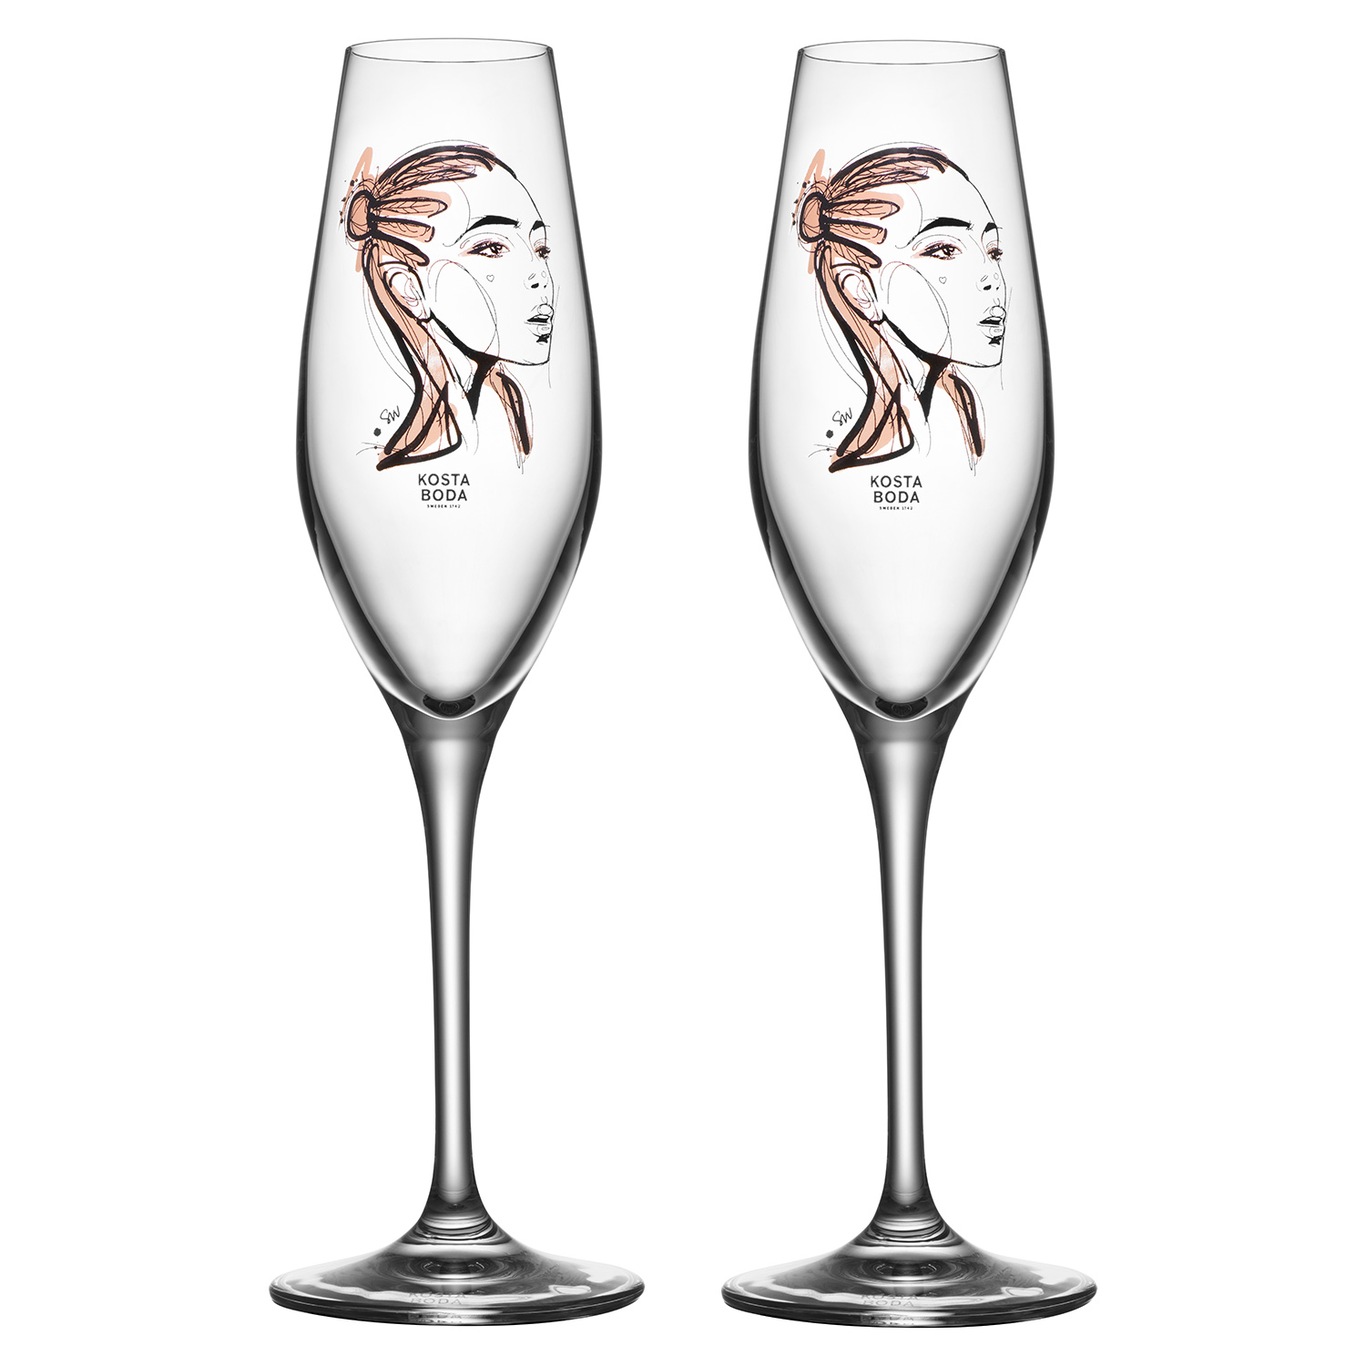 All About You Champagneglass 23 cl  2-pk, Forever Yours